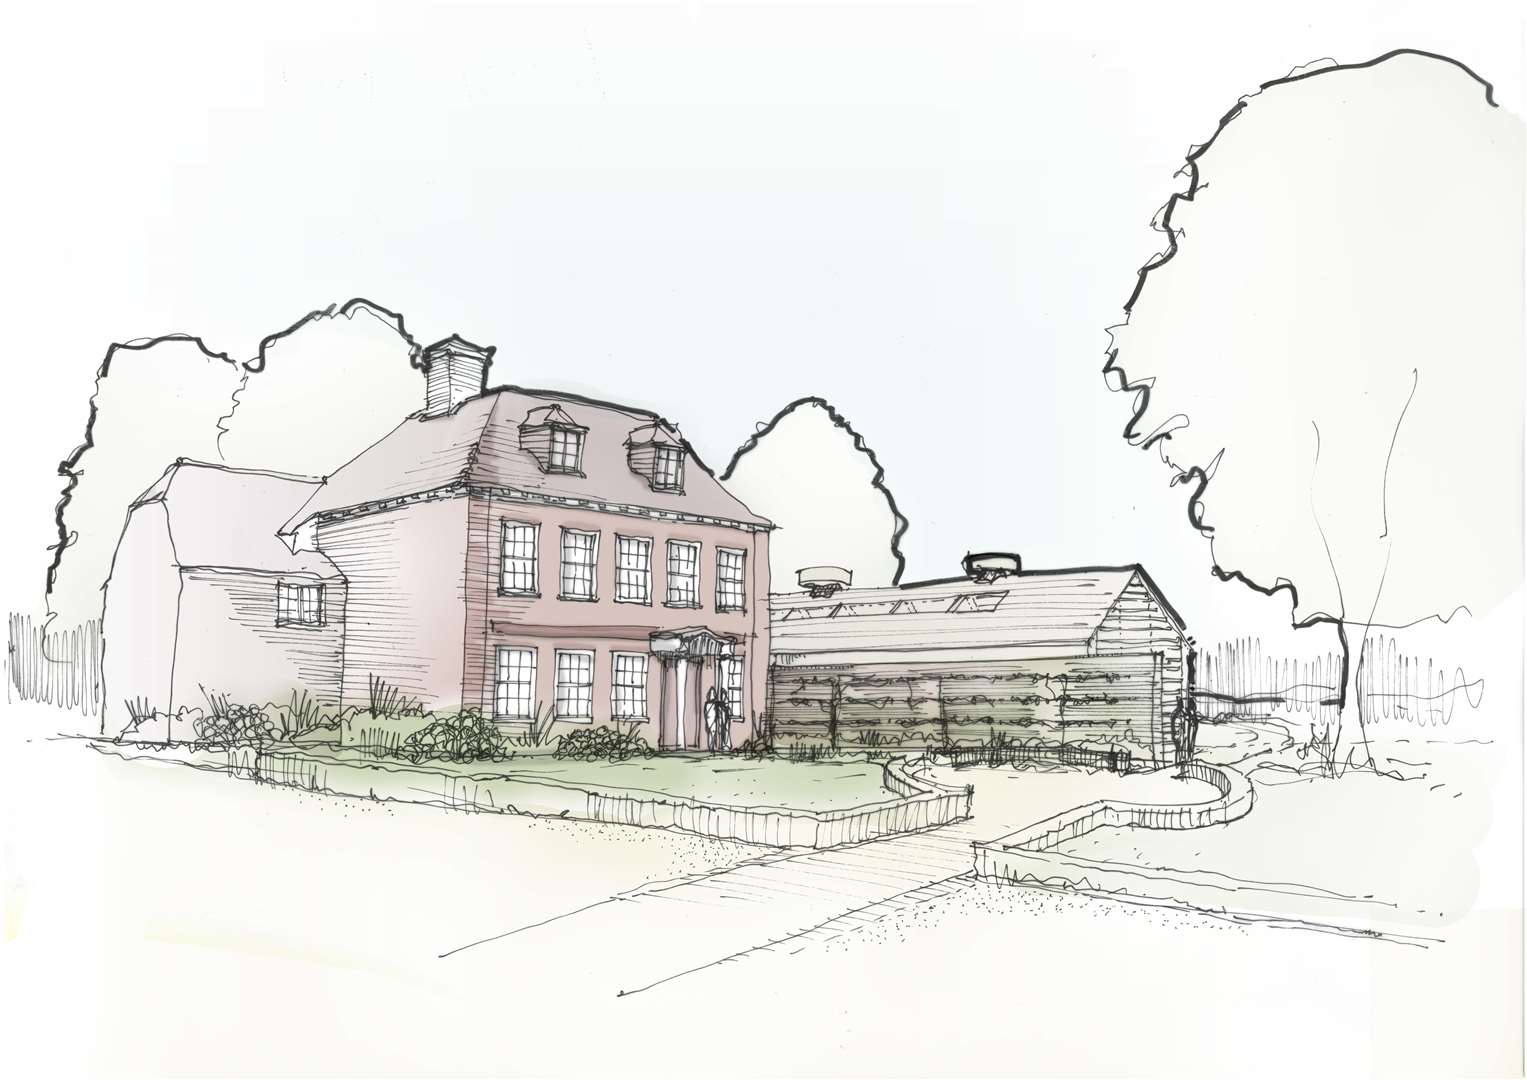 An artist's impression of what Whist House will look like with the proposed extension. (6967297)